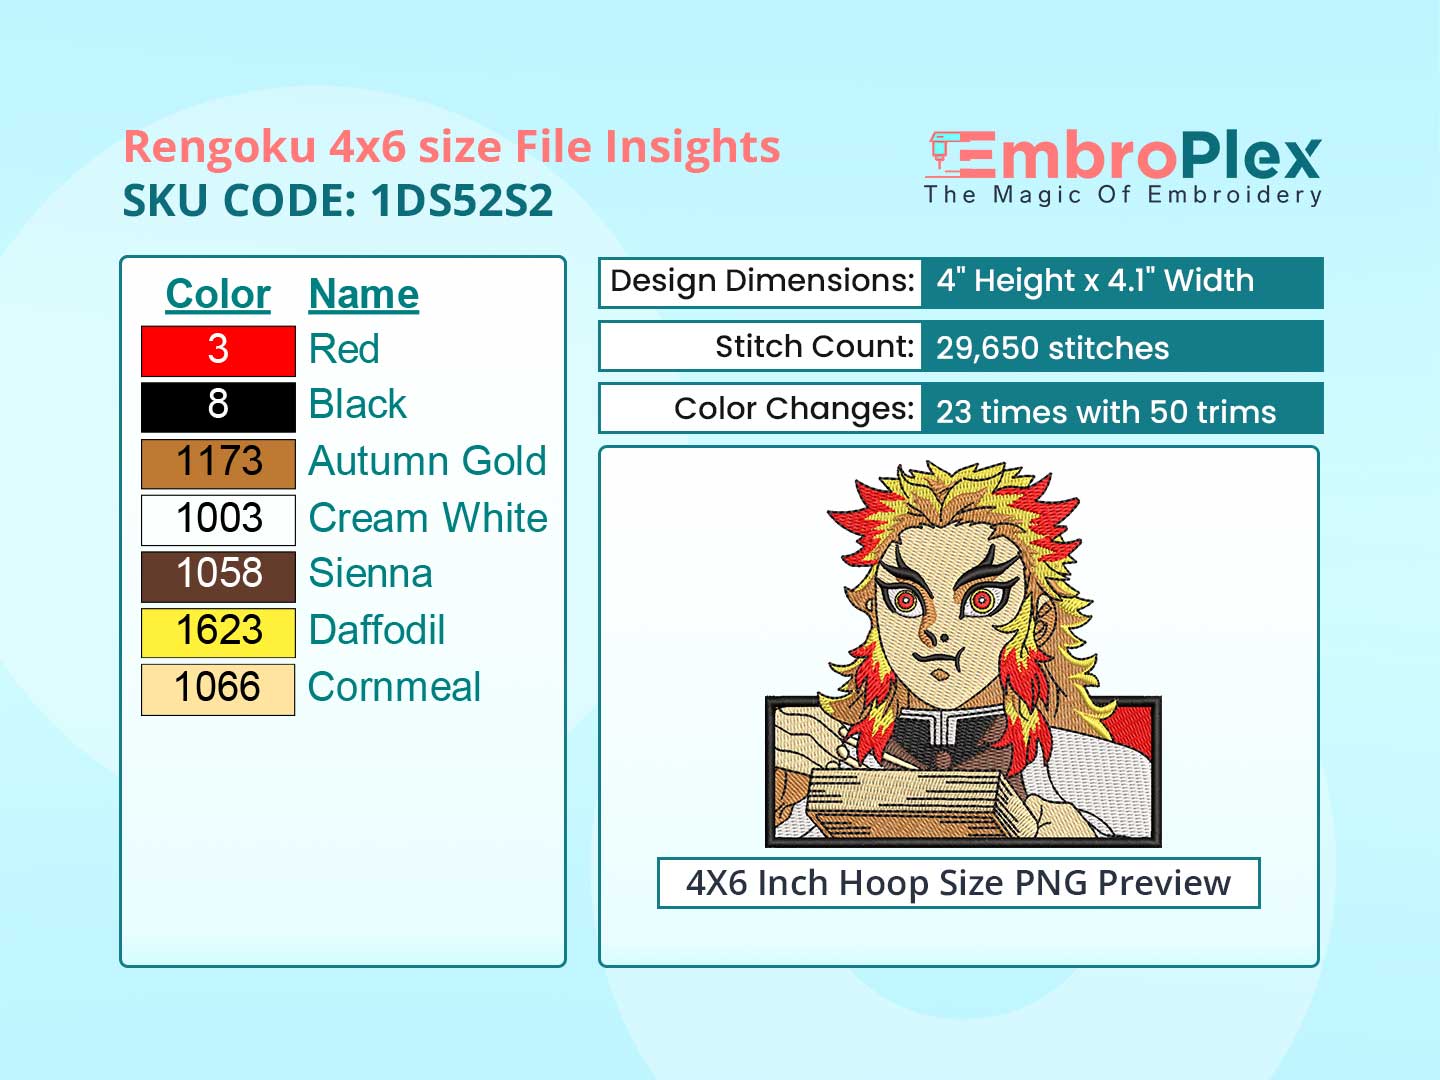 Anime-Inspired Rengoku Embroidery Design File - 4x6 Inch hoop Size Variation overview image